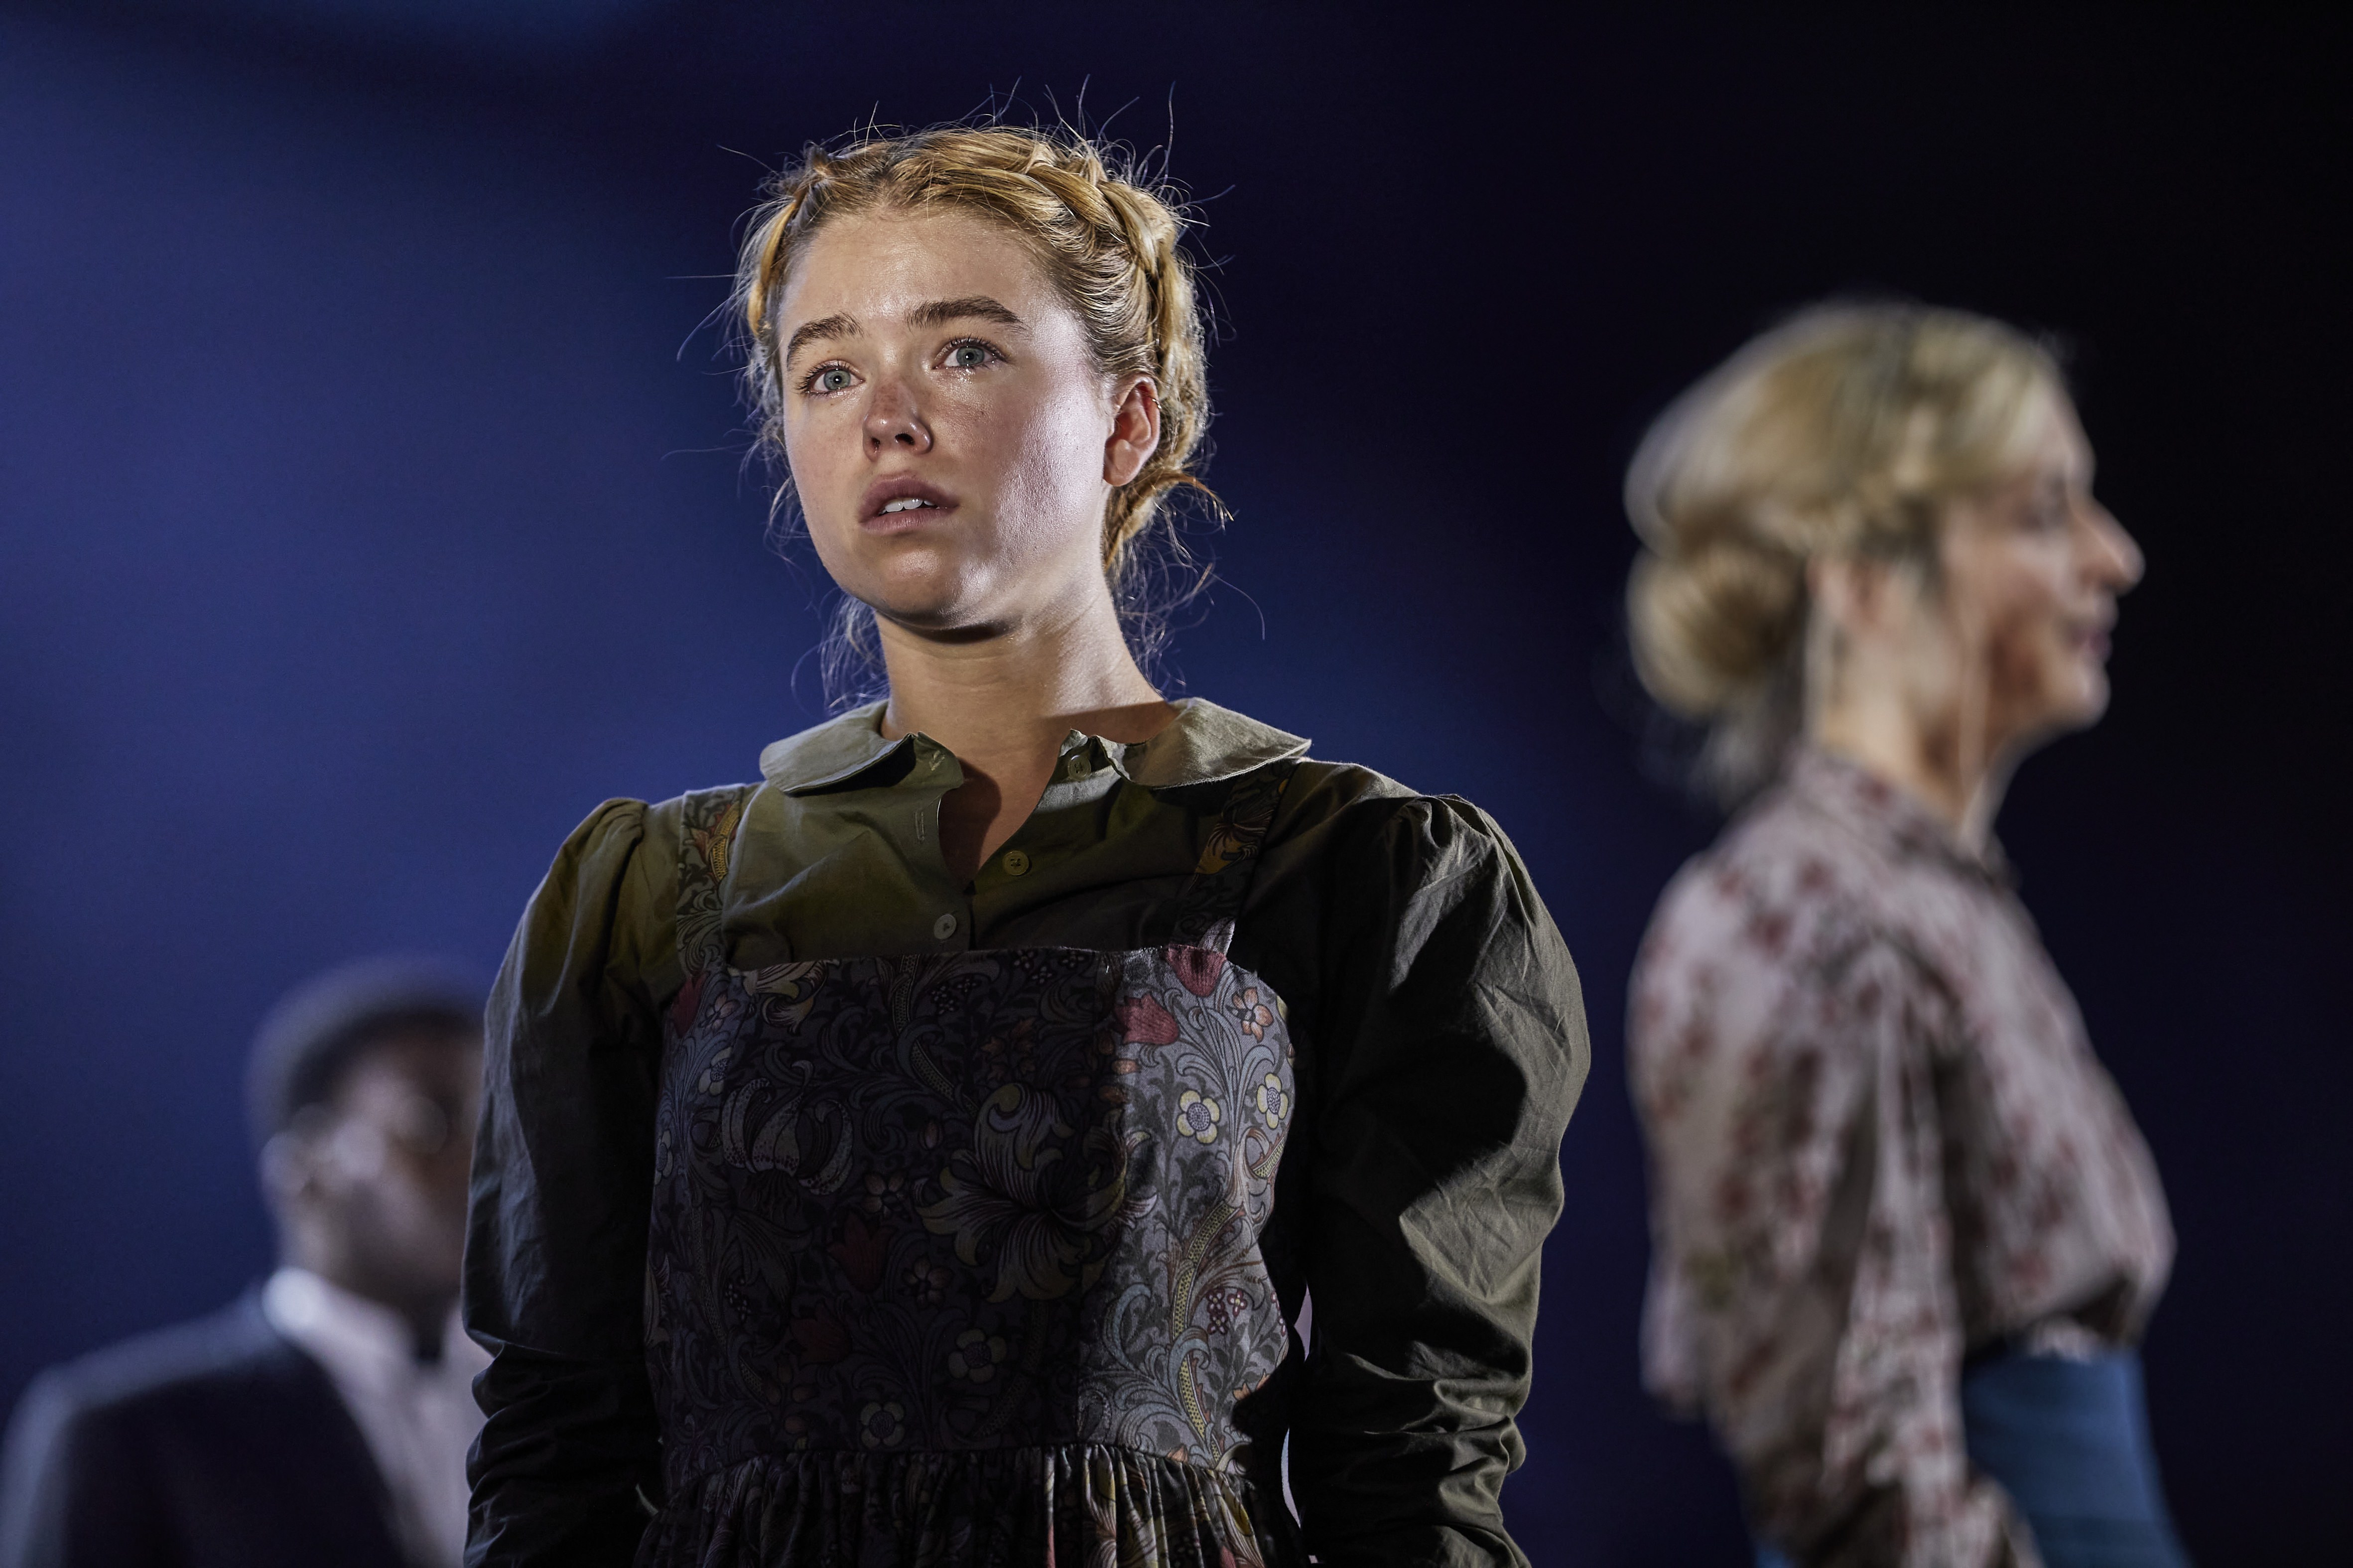 Milly Alcock as Abigail Williams & Caitlin FitzGerald as Elizabeth Proctor in The Crucible west end. Credit Brinkhoff Moegenburg